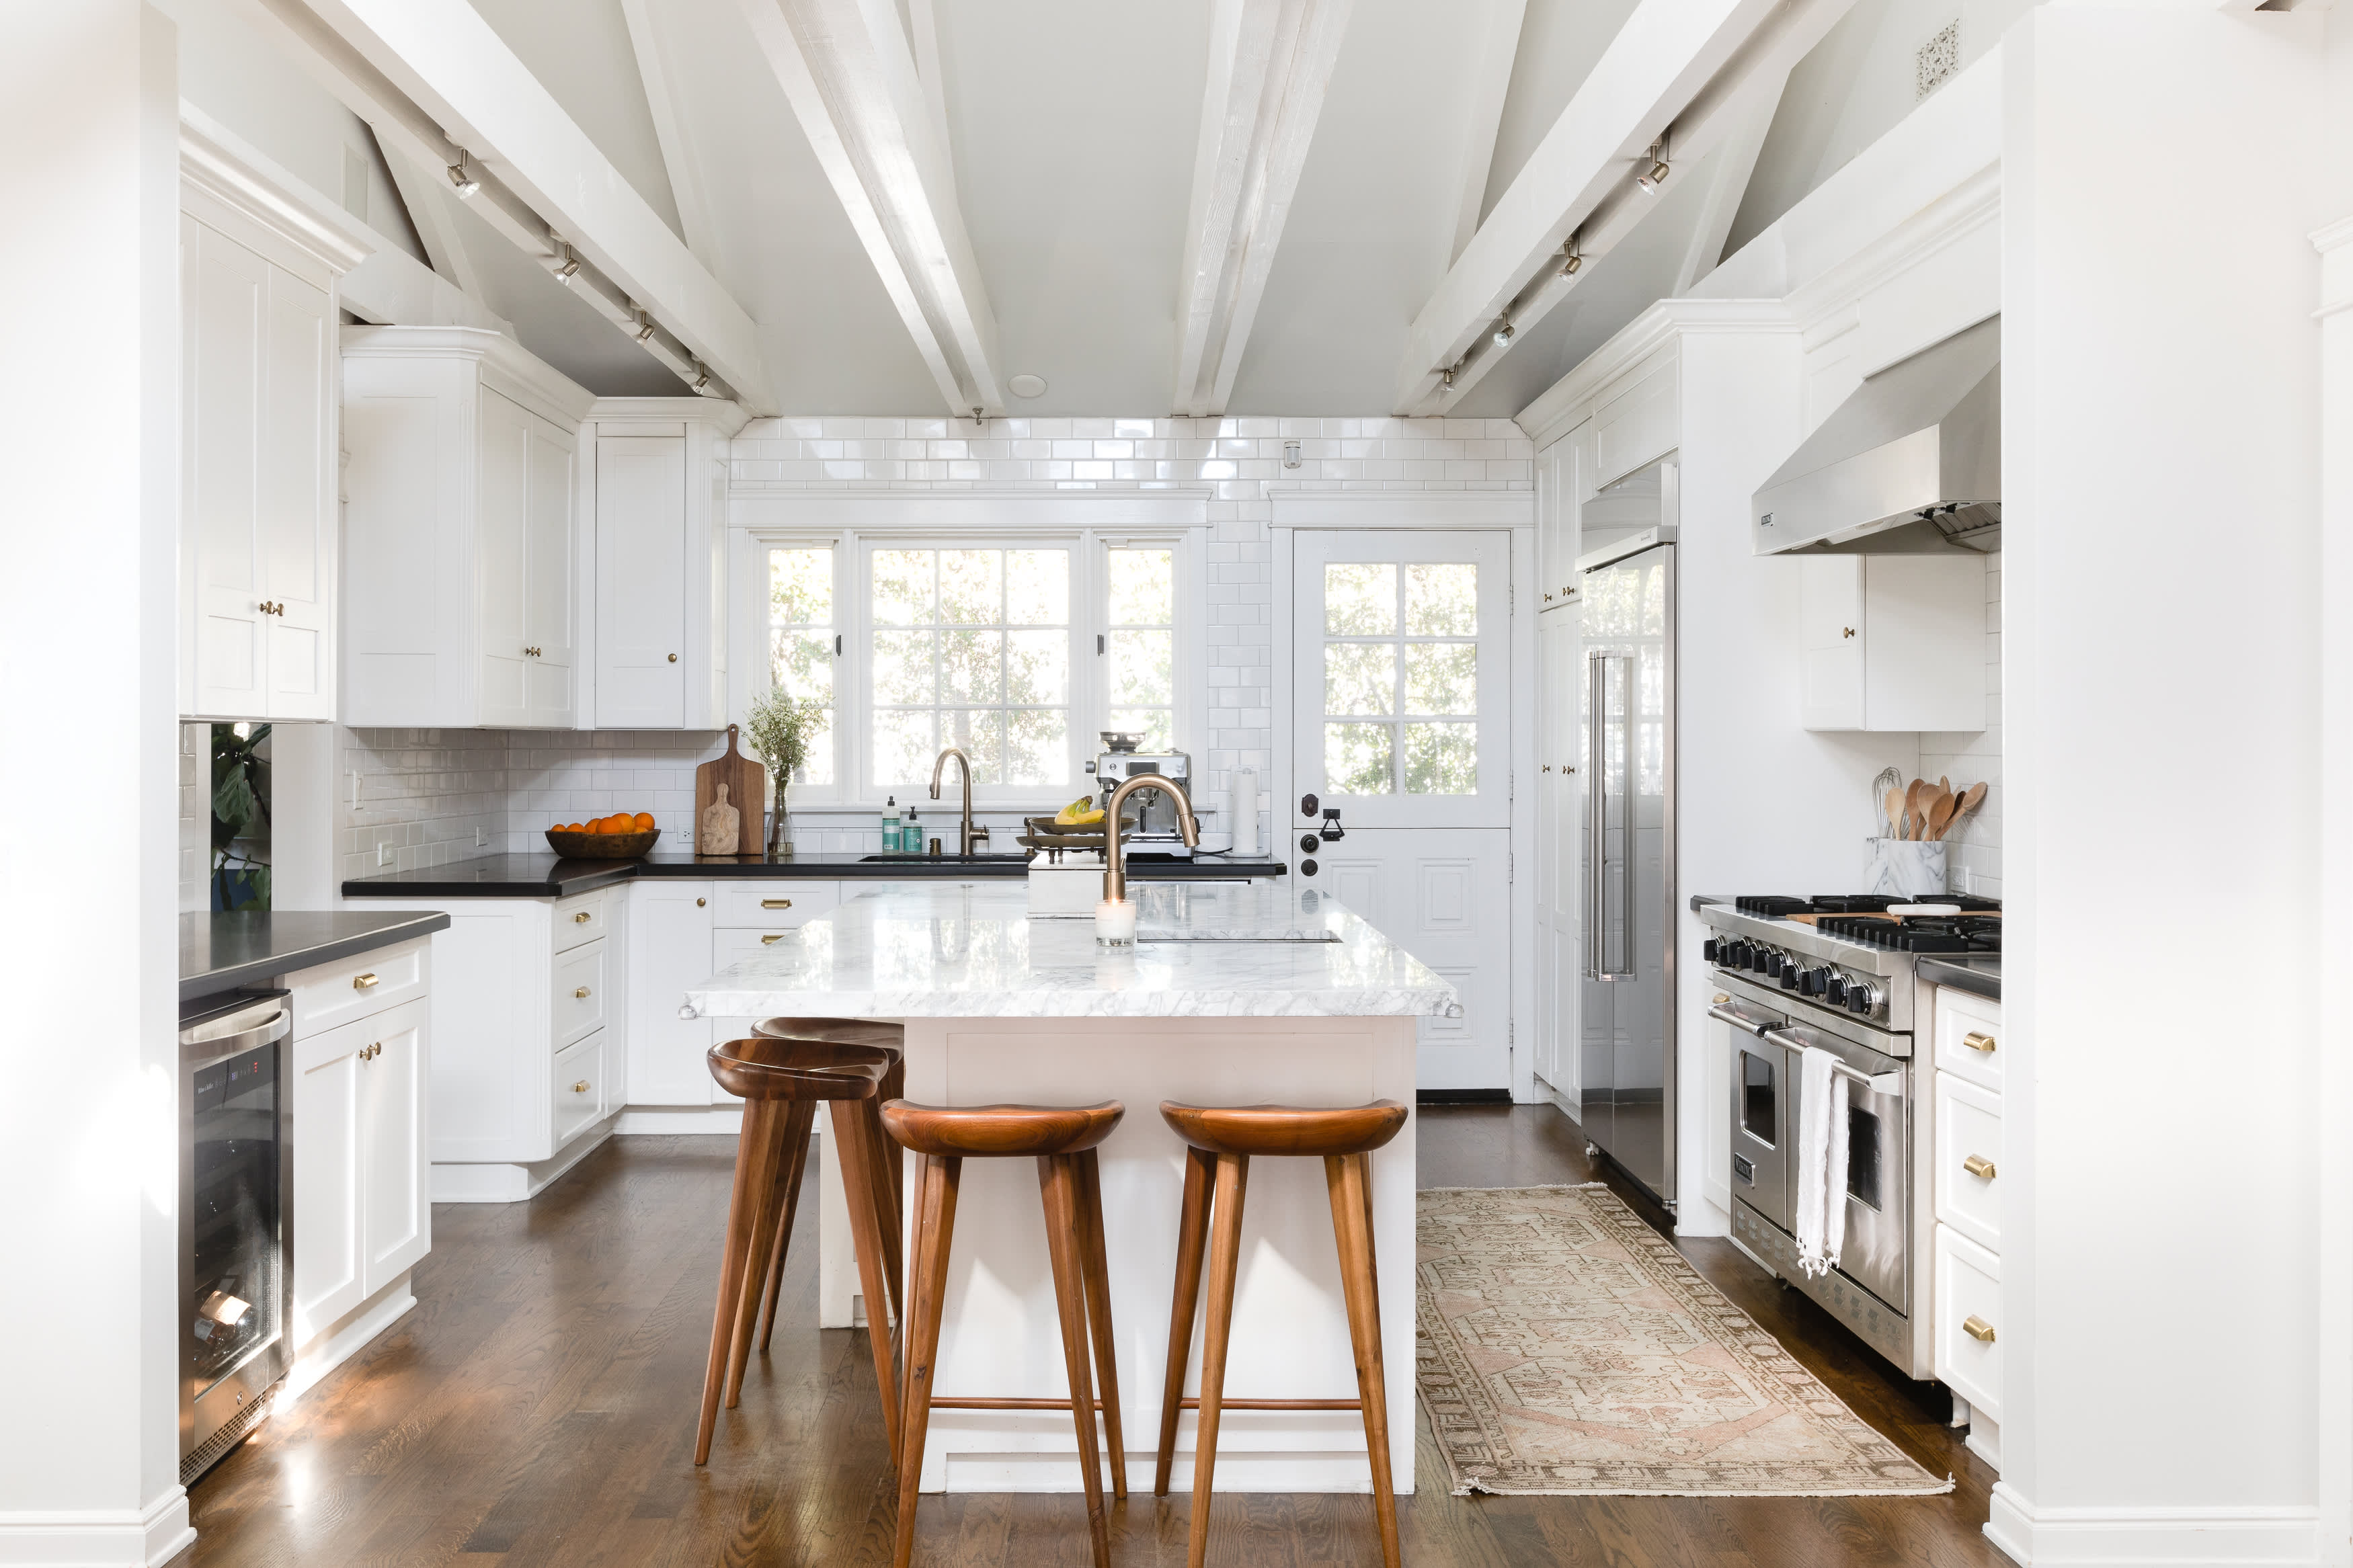 10 of the Most Popular Farmhouse Kitchens on Apartment Therapy